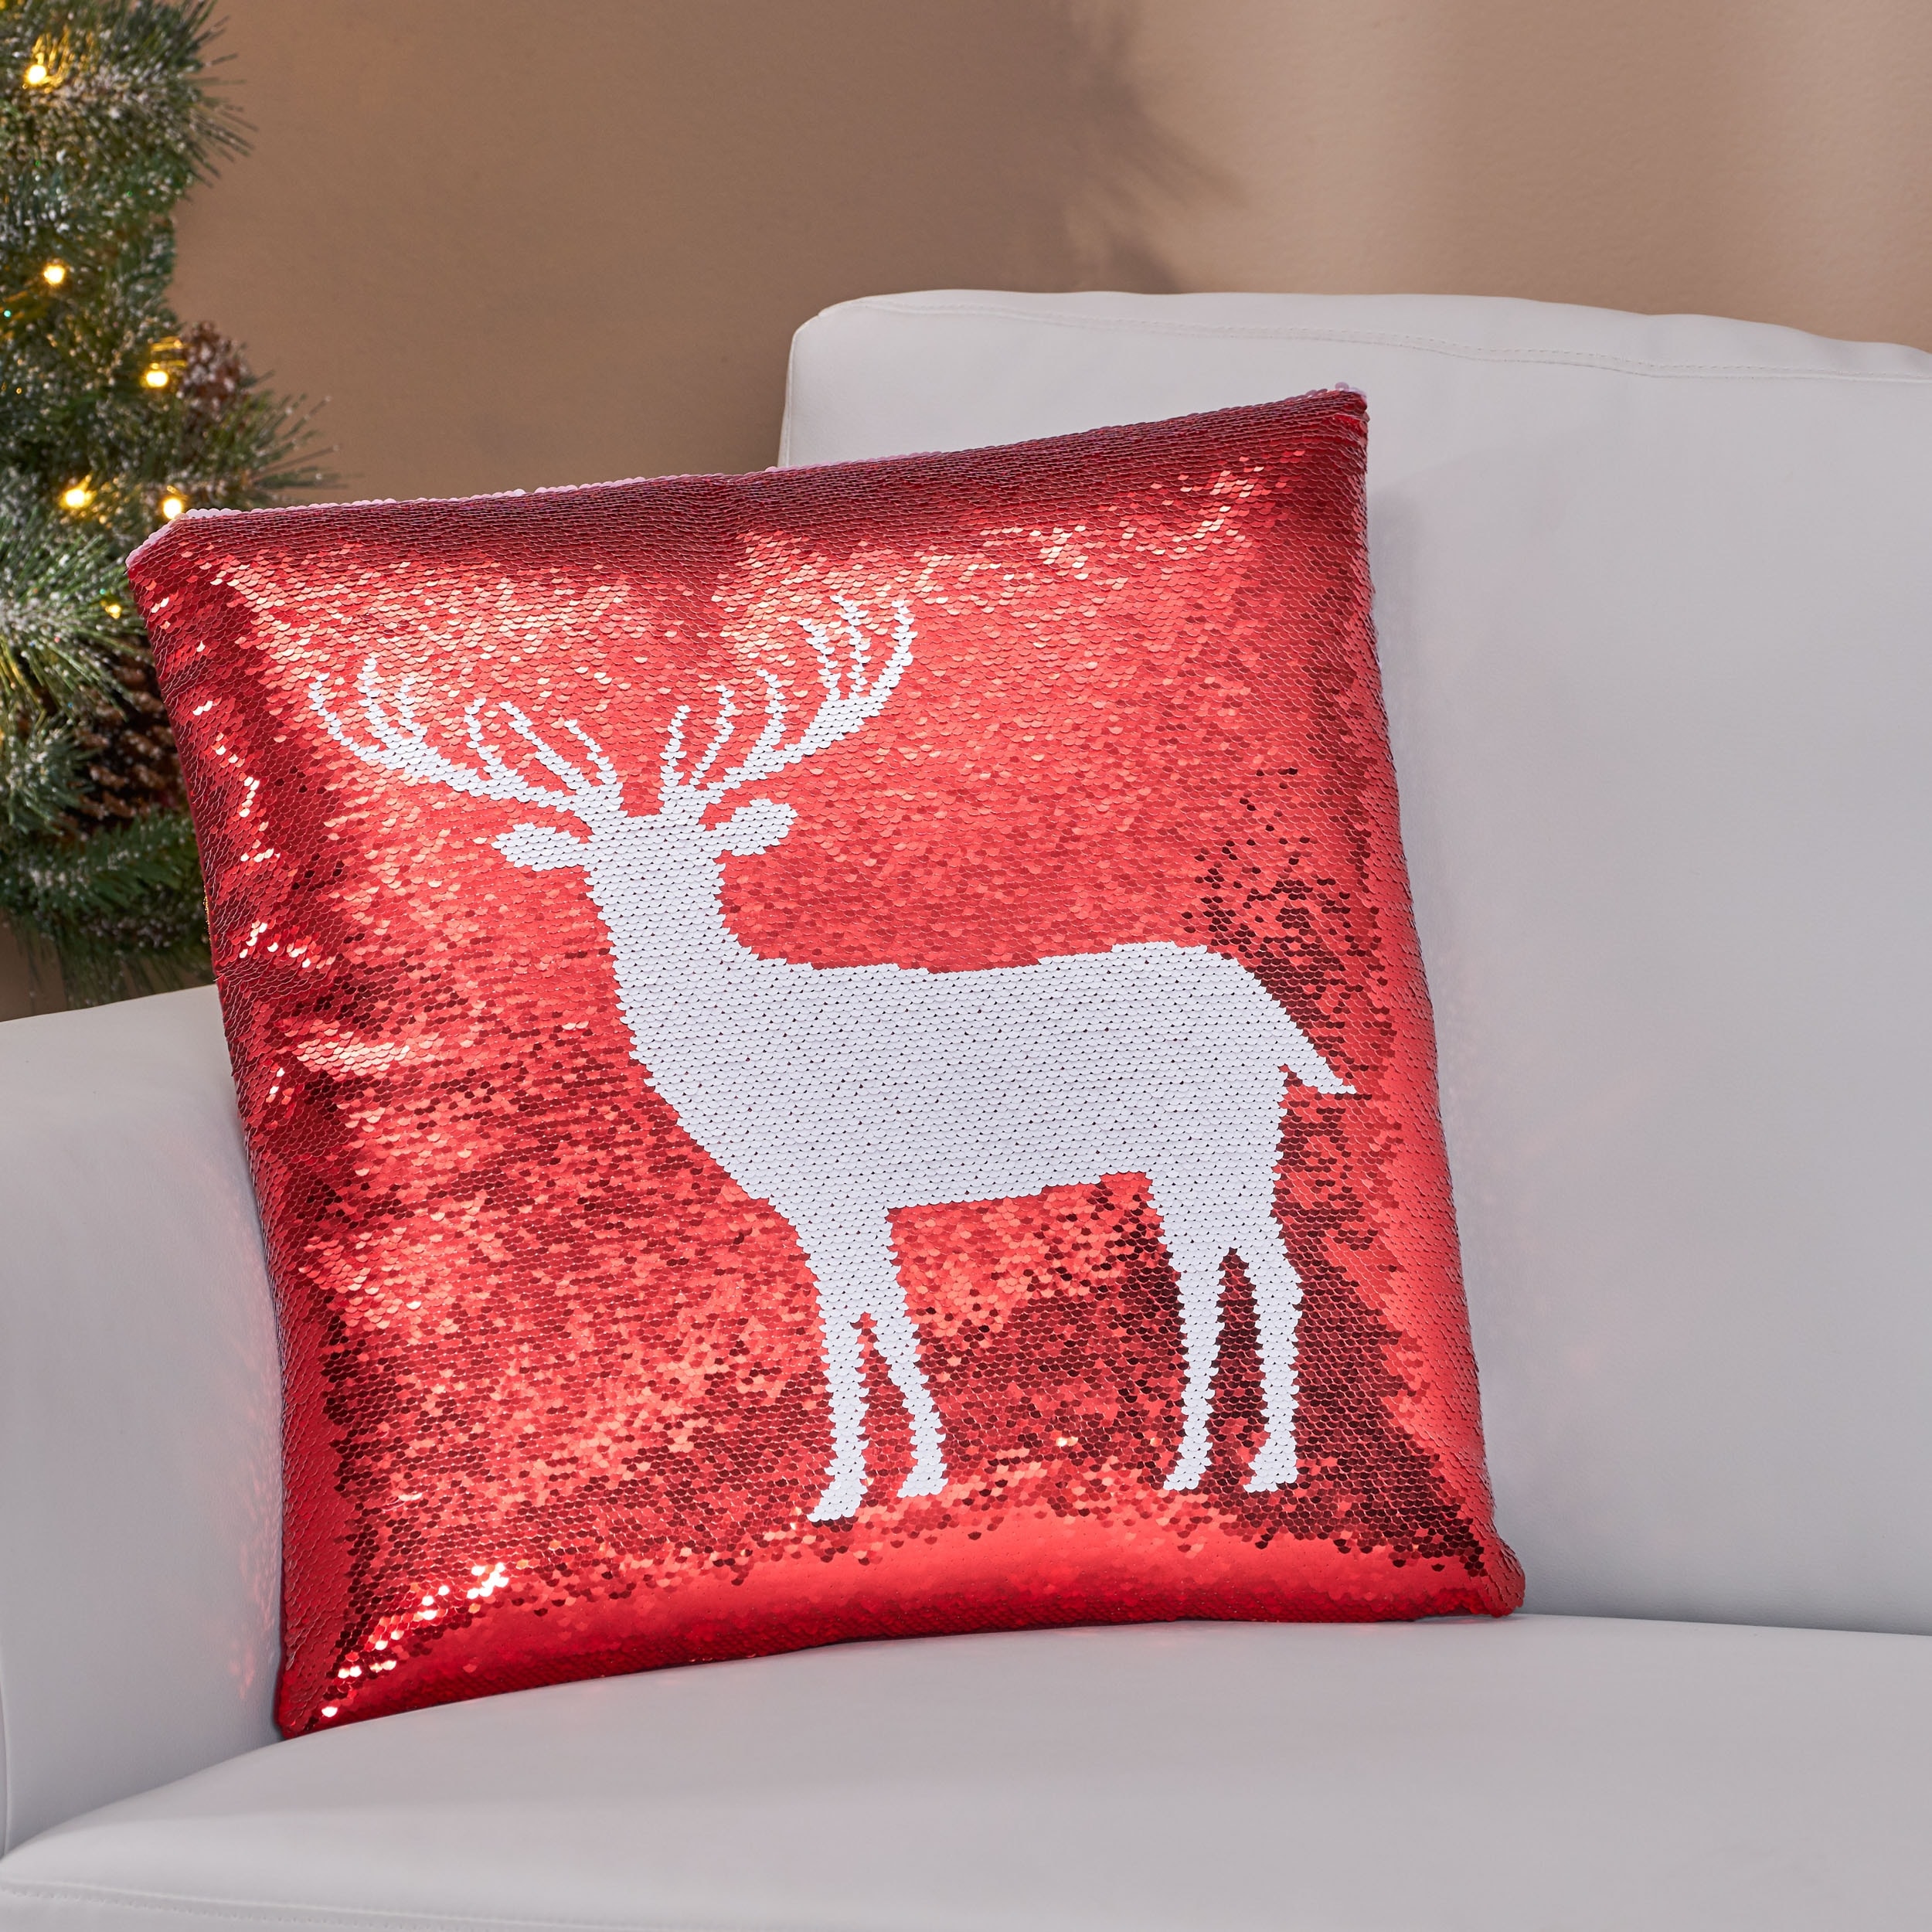 https://ak1.ostkcdn.com/images/products/is/images/direct/f6c64a6b4fbbd8b6b2dbf60dbe262767ec43f430/Trimble-Glam-Sequin-Christmas-Throw-Pillow-by-Christopher-Knight-Home.jpg